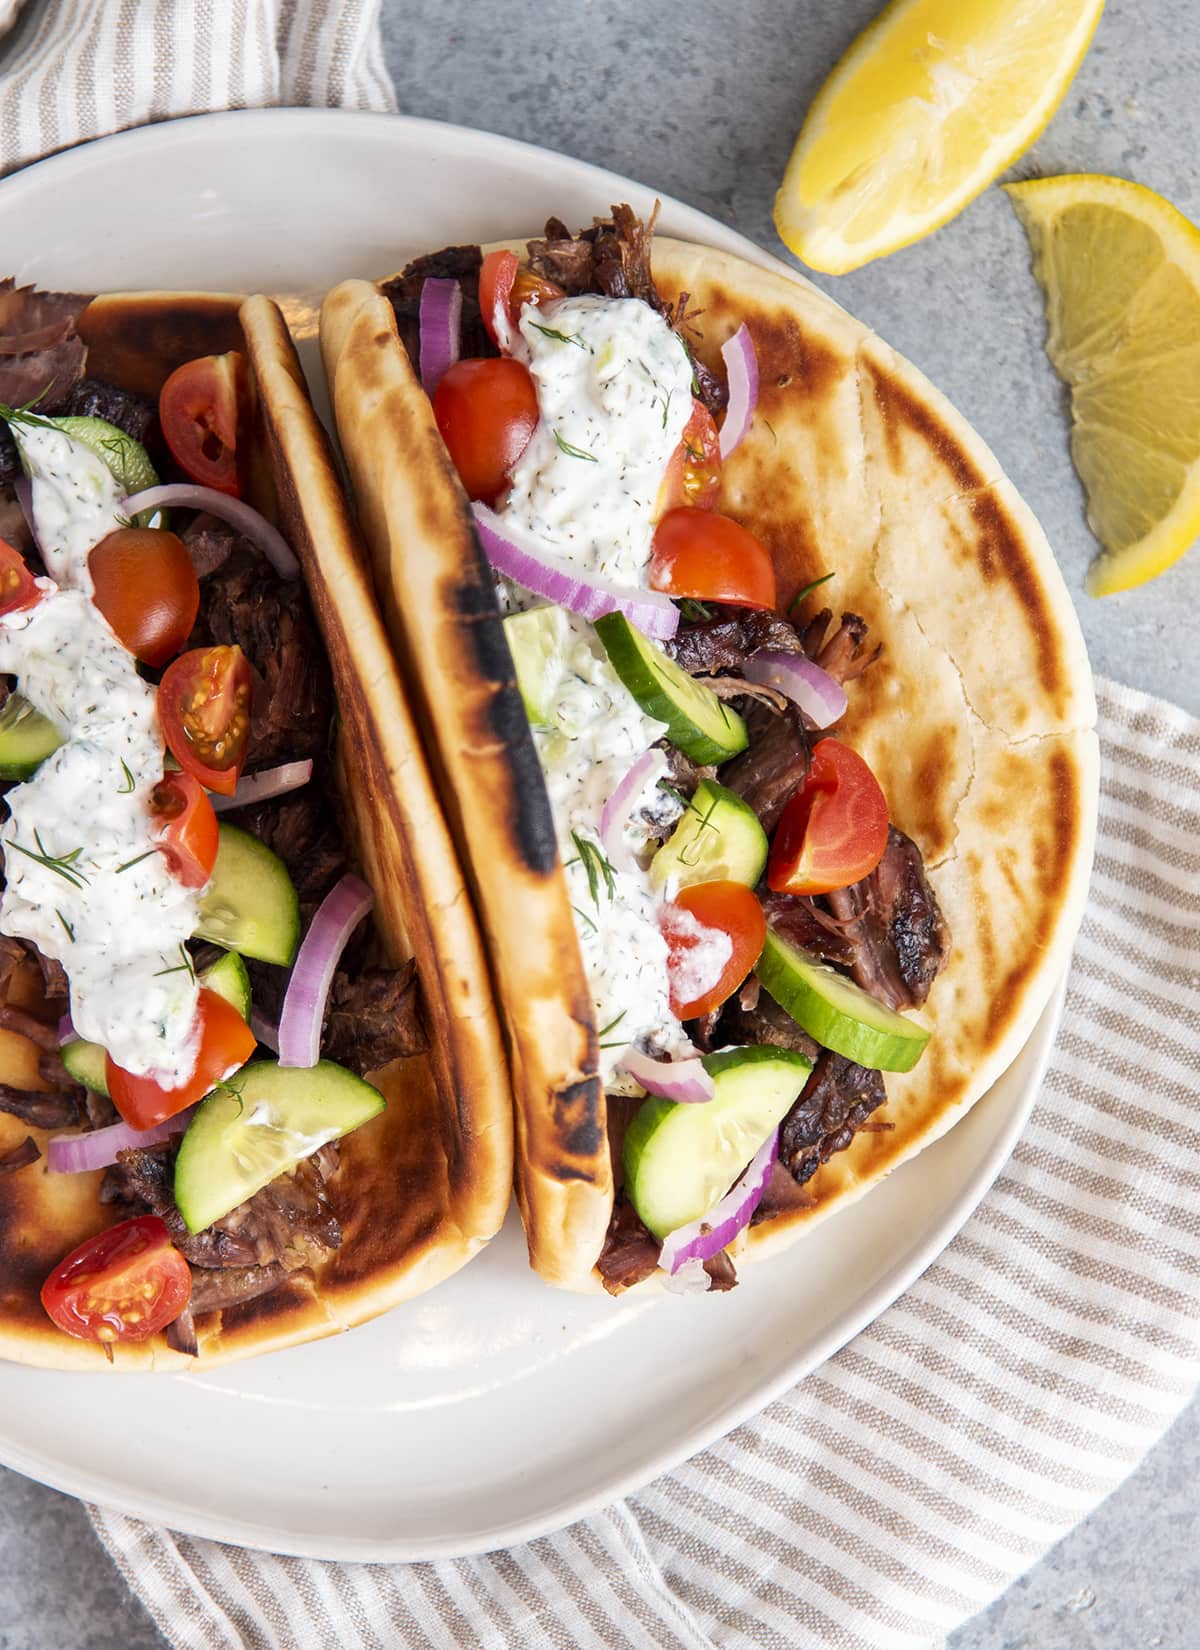 Two pitas topped with slow cooker beef gyro meat, and gyro toppings on a plate.